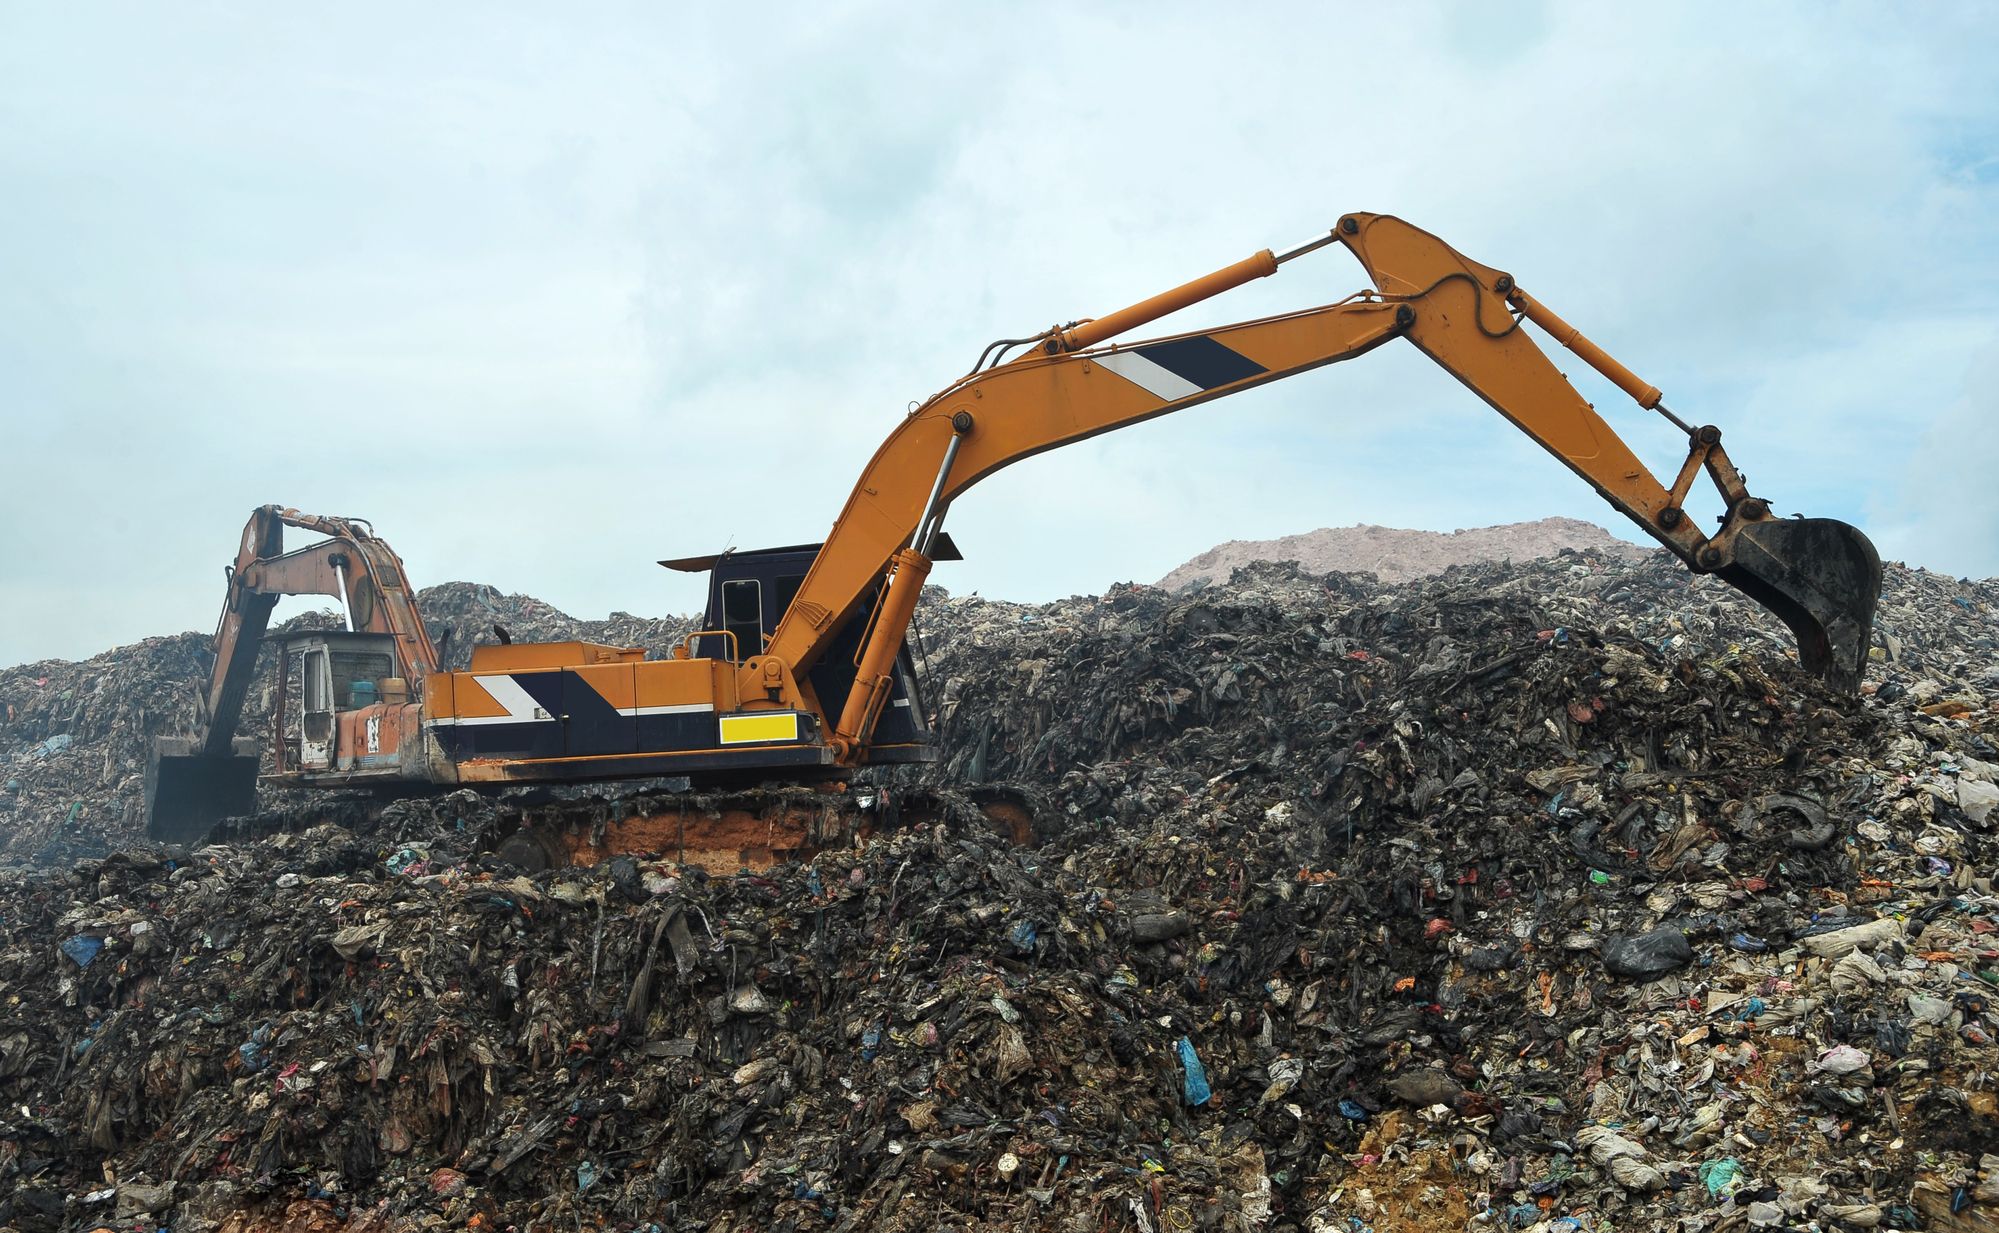 Excavator working in a landfill